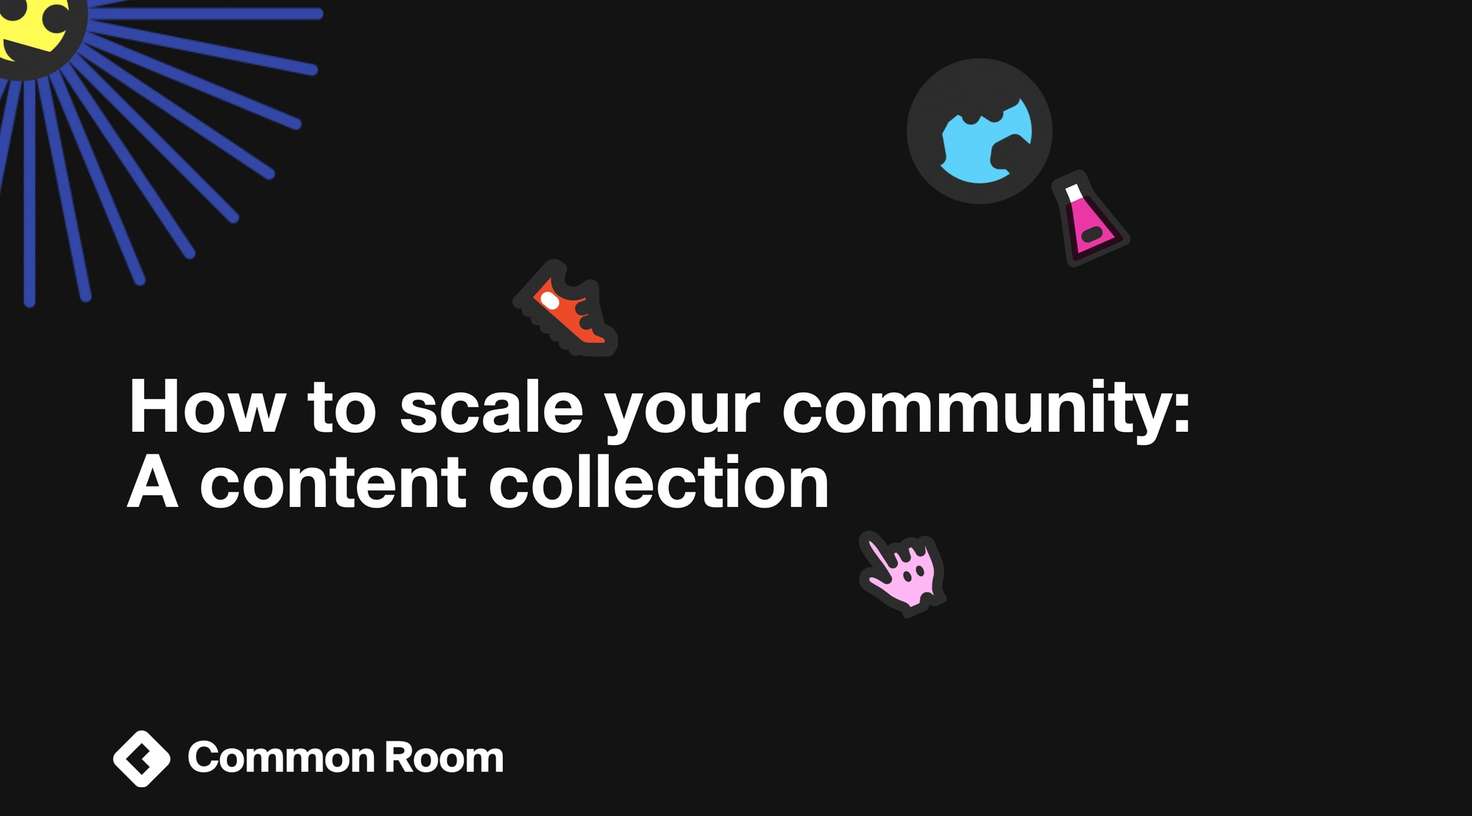 Title card for content collection: How to scale your community